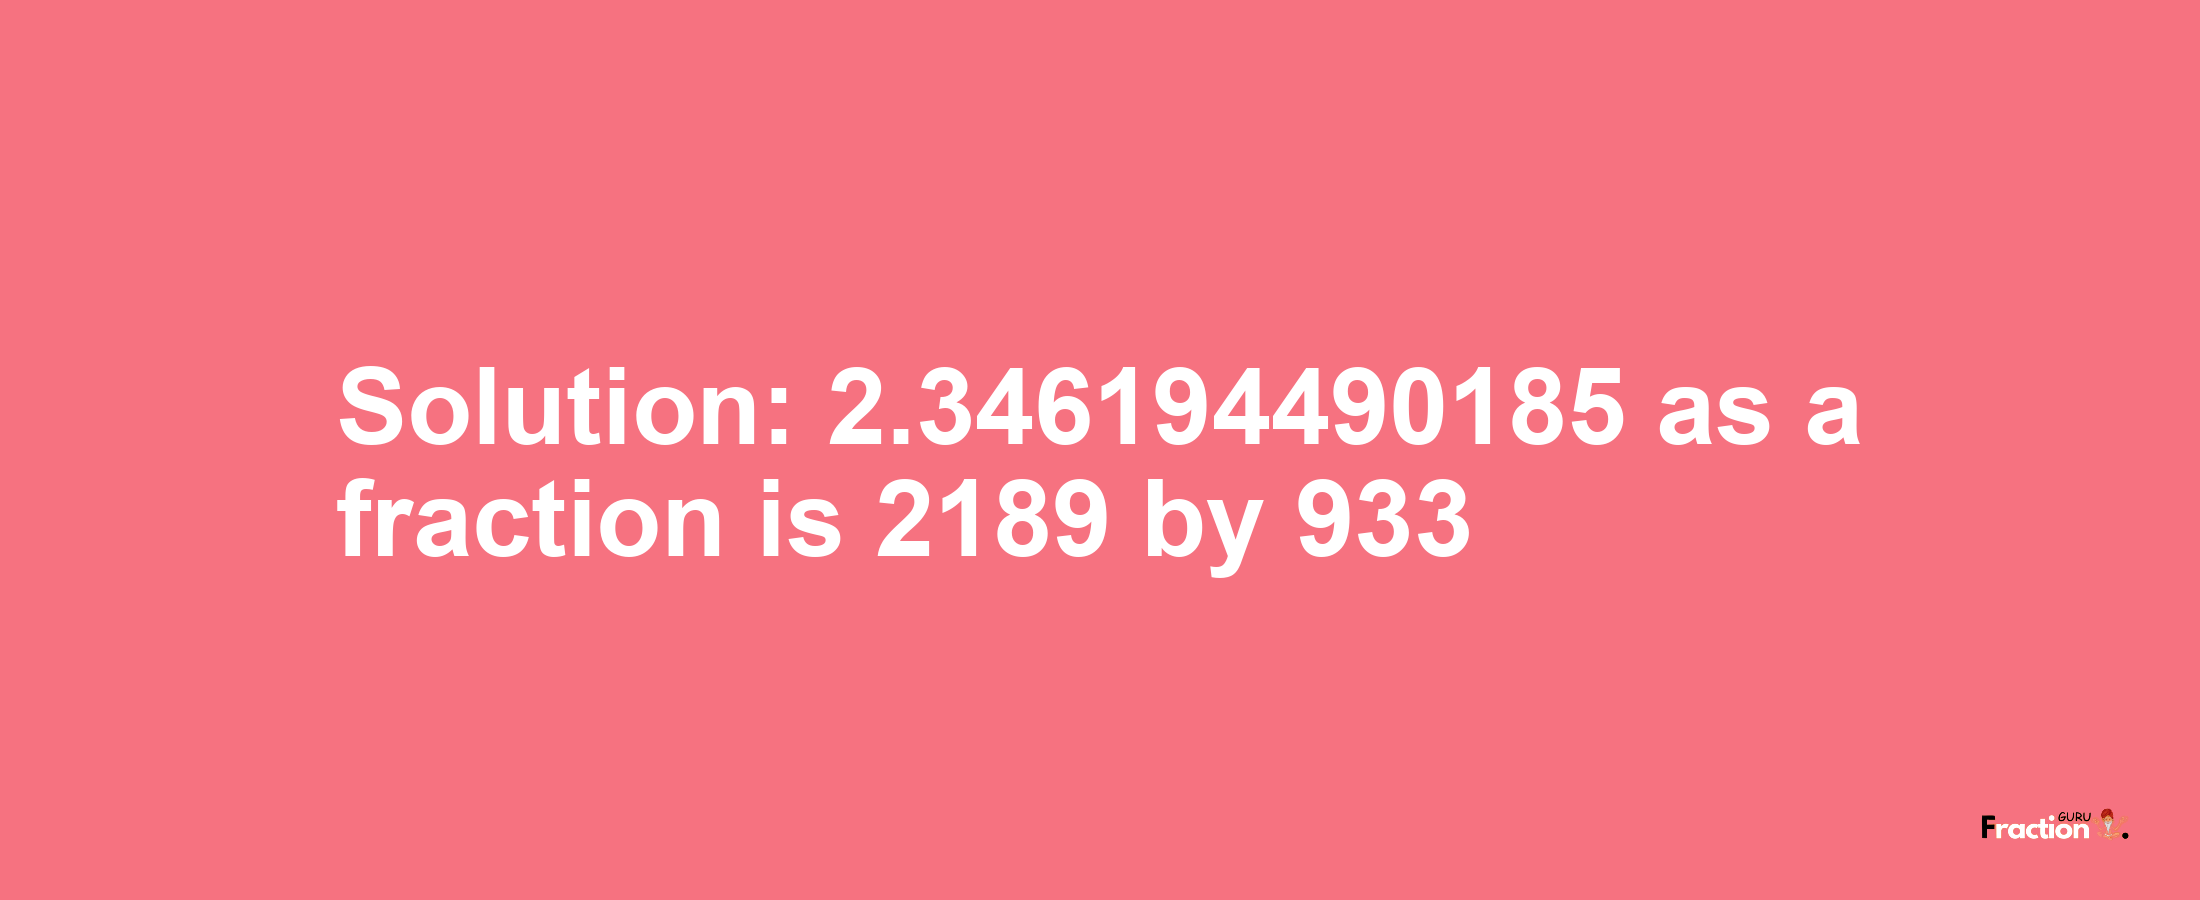 Solution:2.346194490185 as a fraction is 2189/933